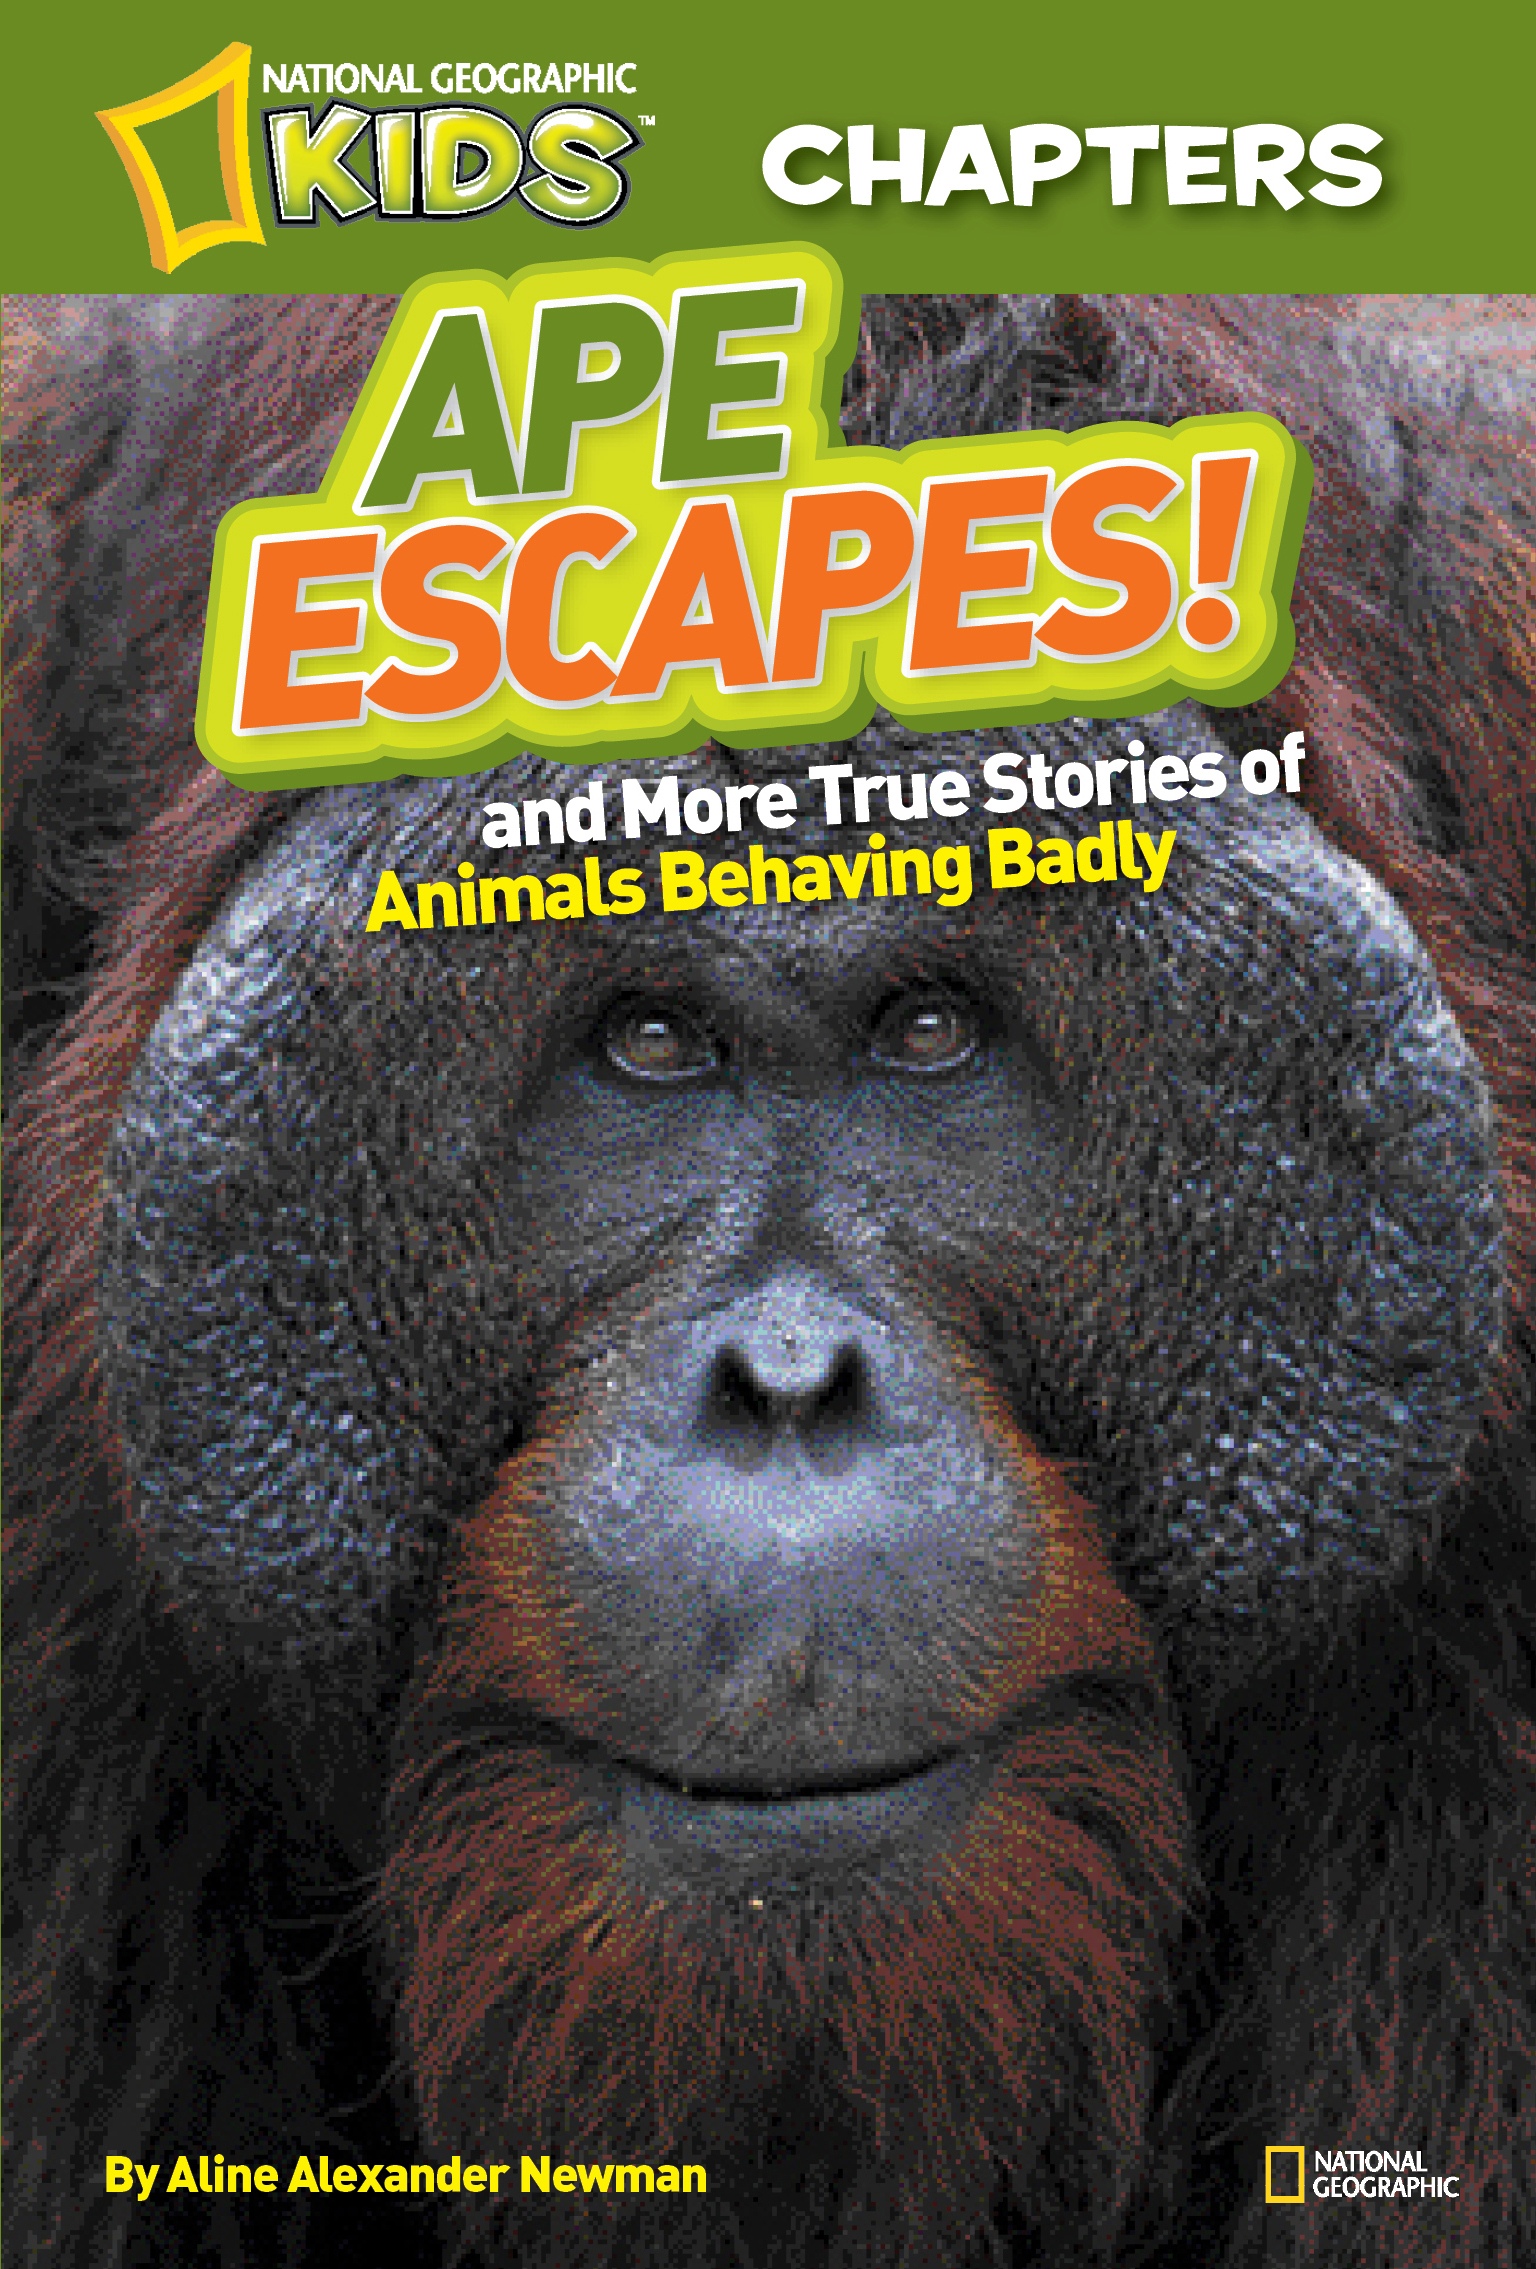 National Geographic kids chapters: ape escapes and more true stories of animals behaving badly cover image